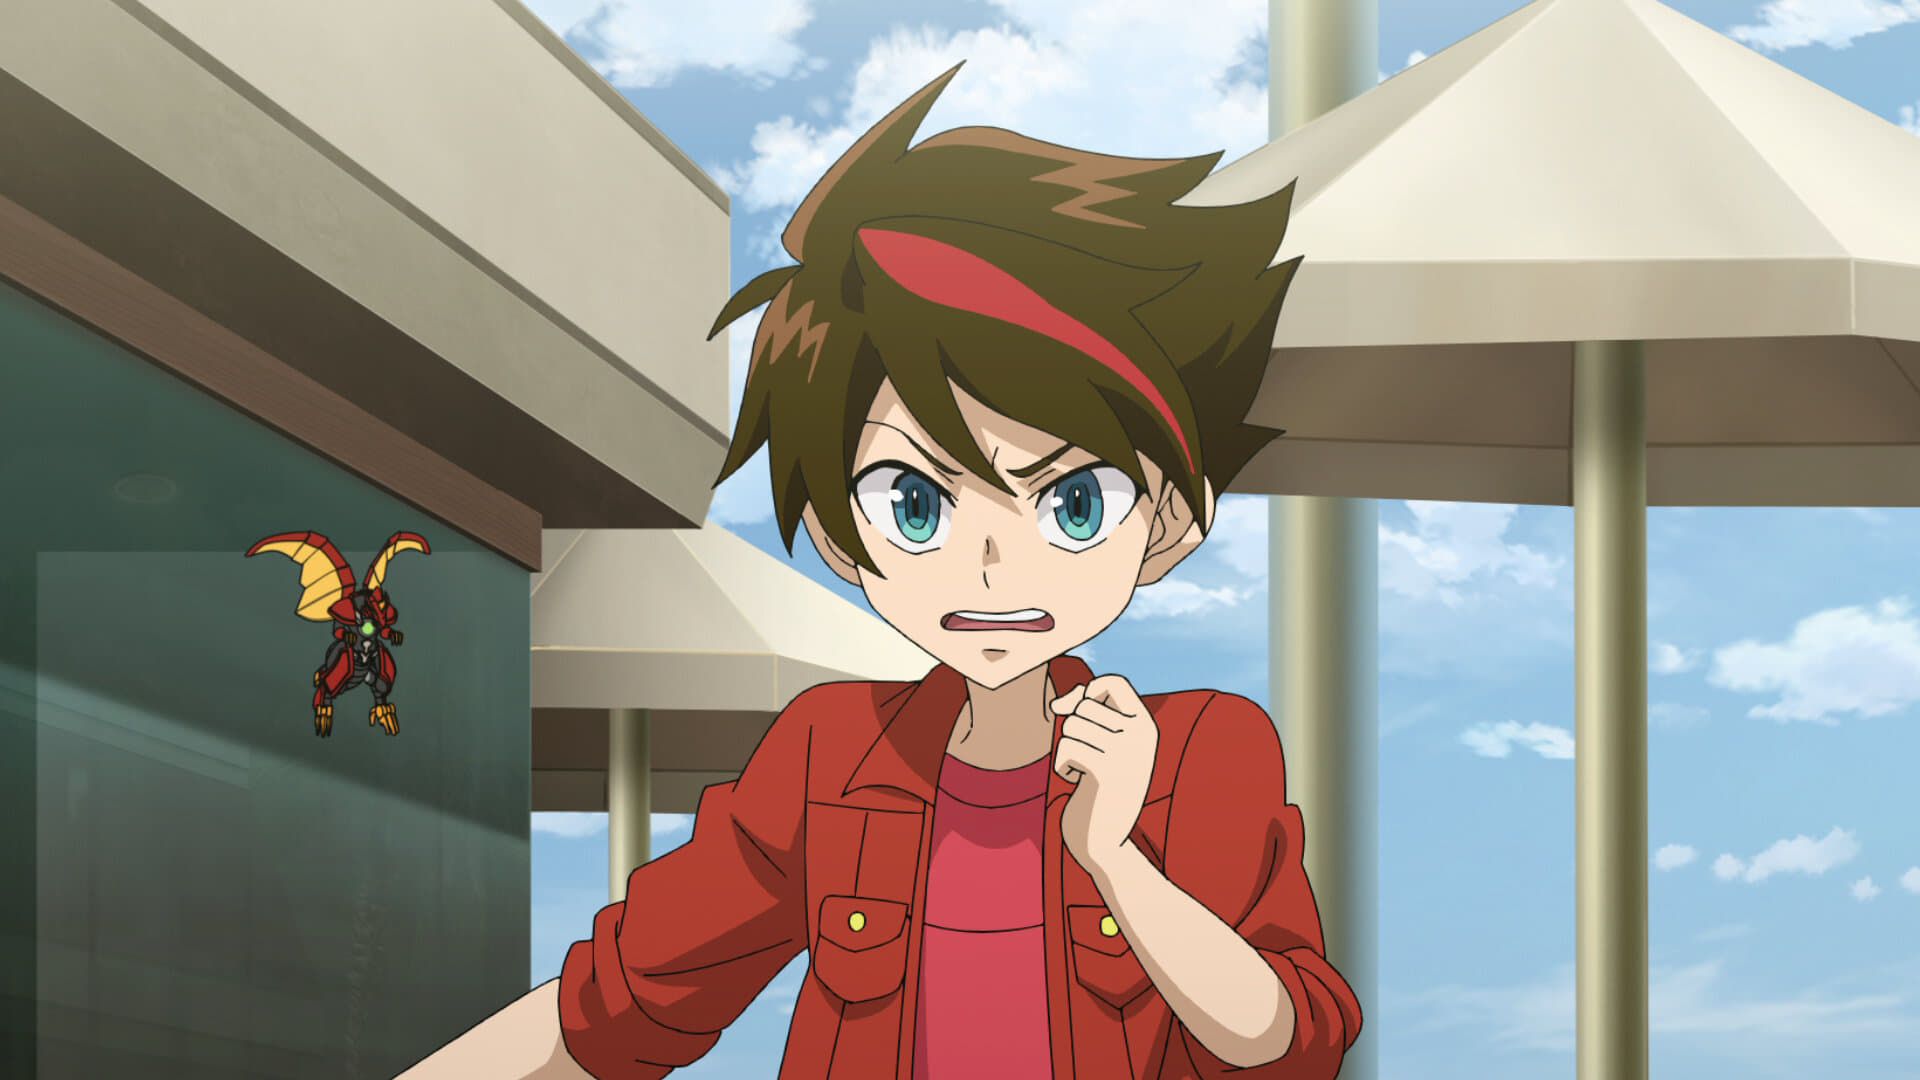 Watch Bakugan: Battle Planet Season 1, Episode 7: The Exit; The Lost and  the Cost